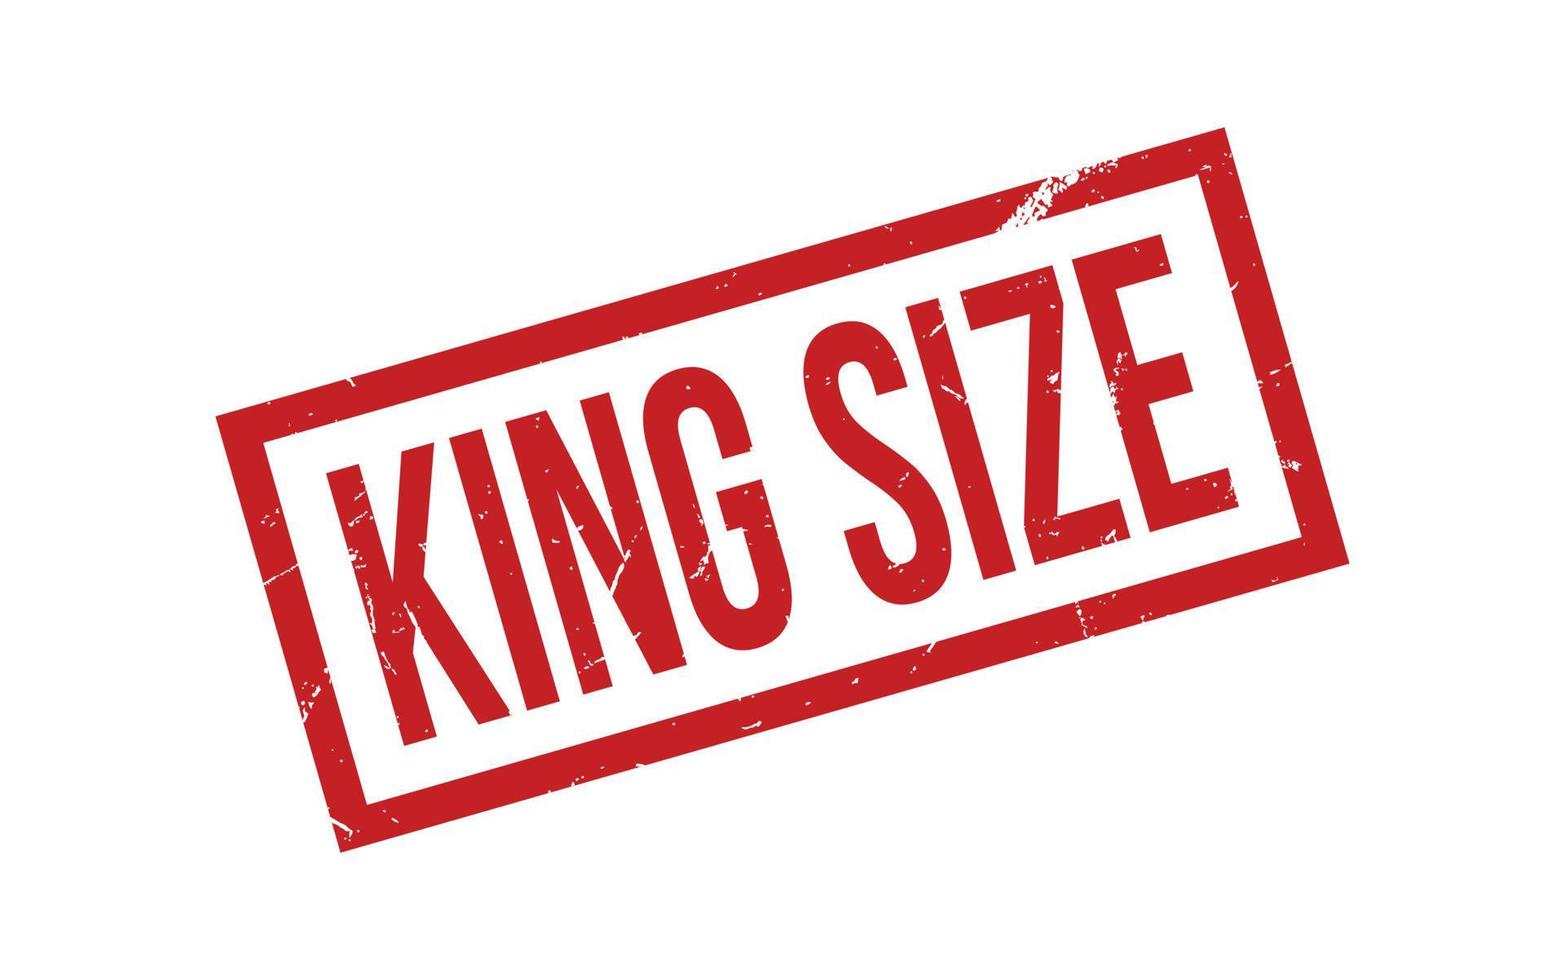 King Size Rubber Stamp Seal Vector